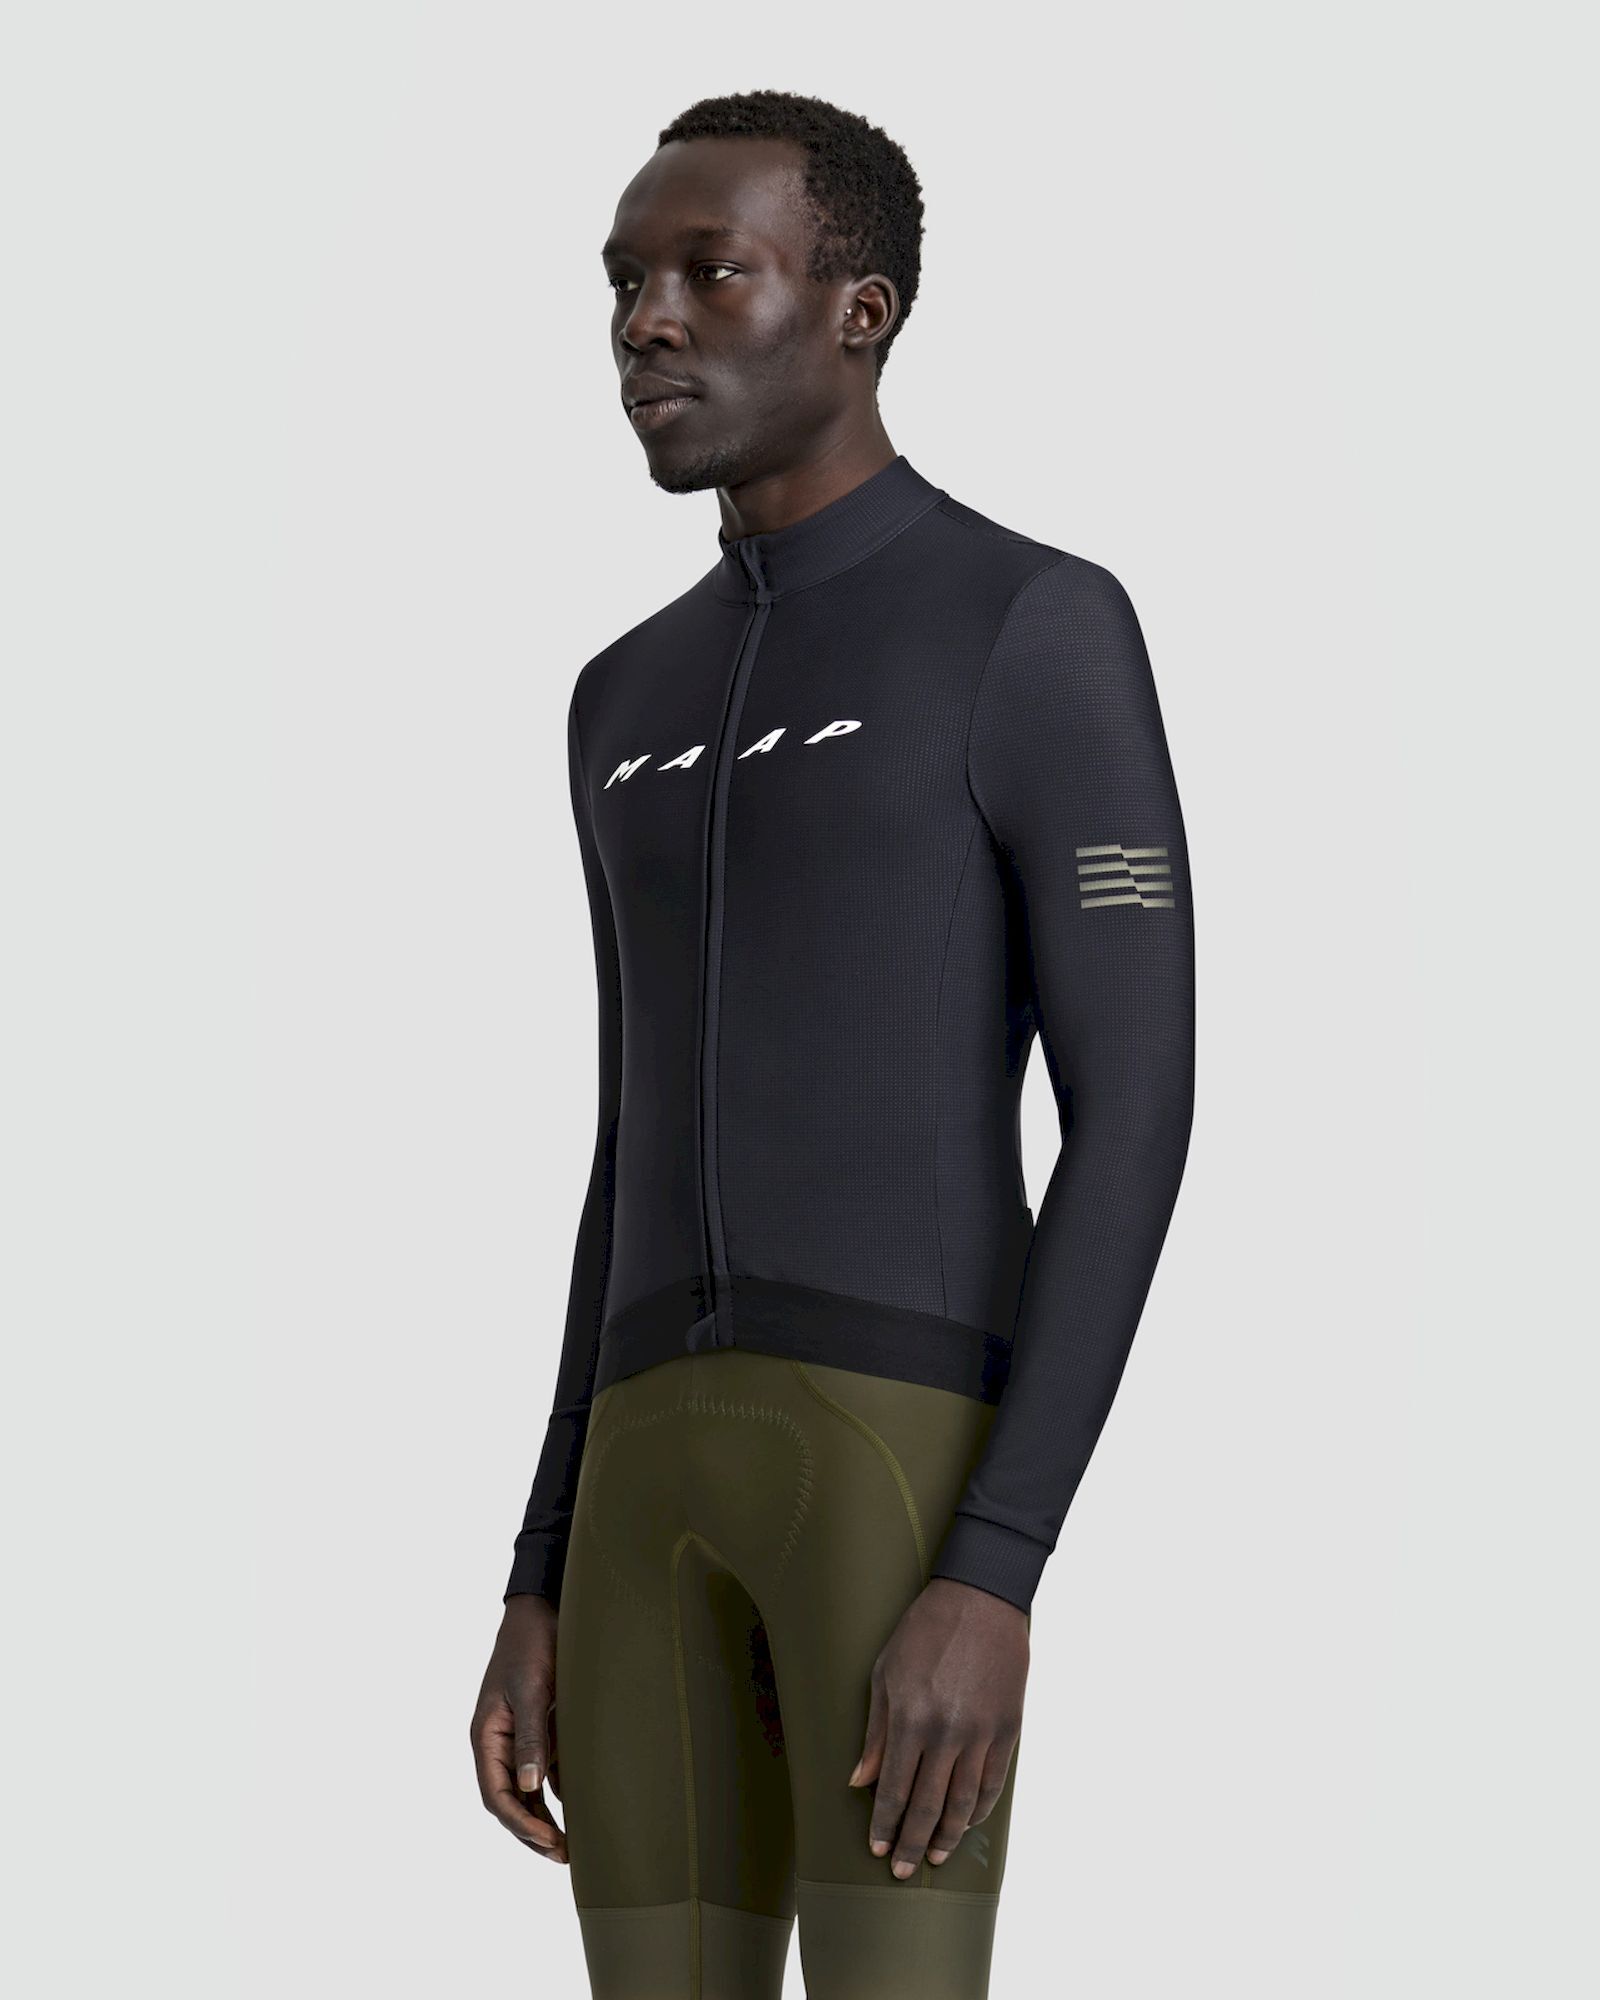 Maap Evade Thermal LS Jersey - Maillot vélo homme | Hardloop